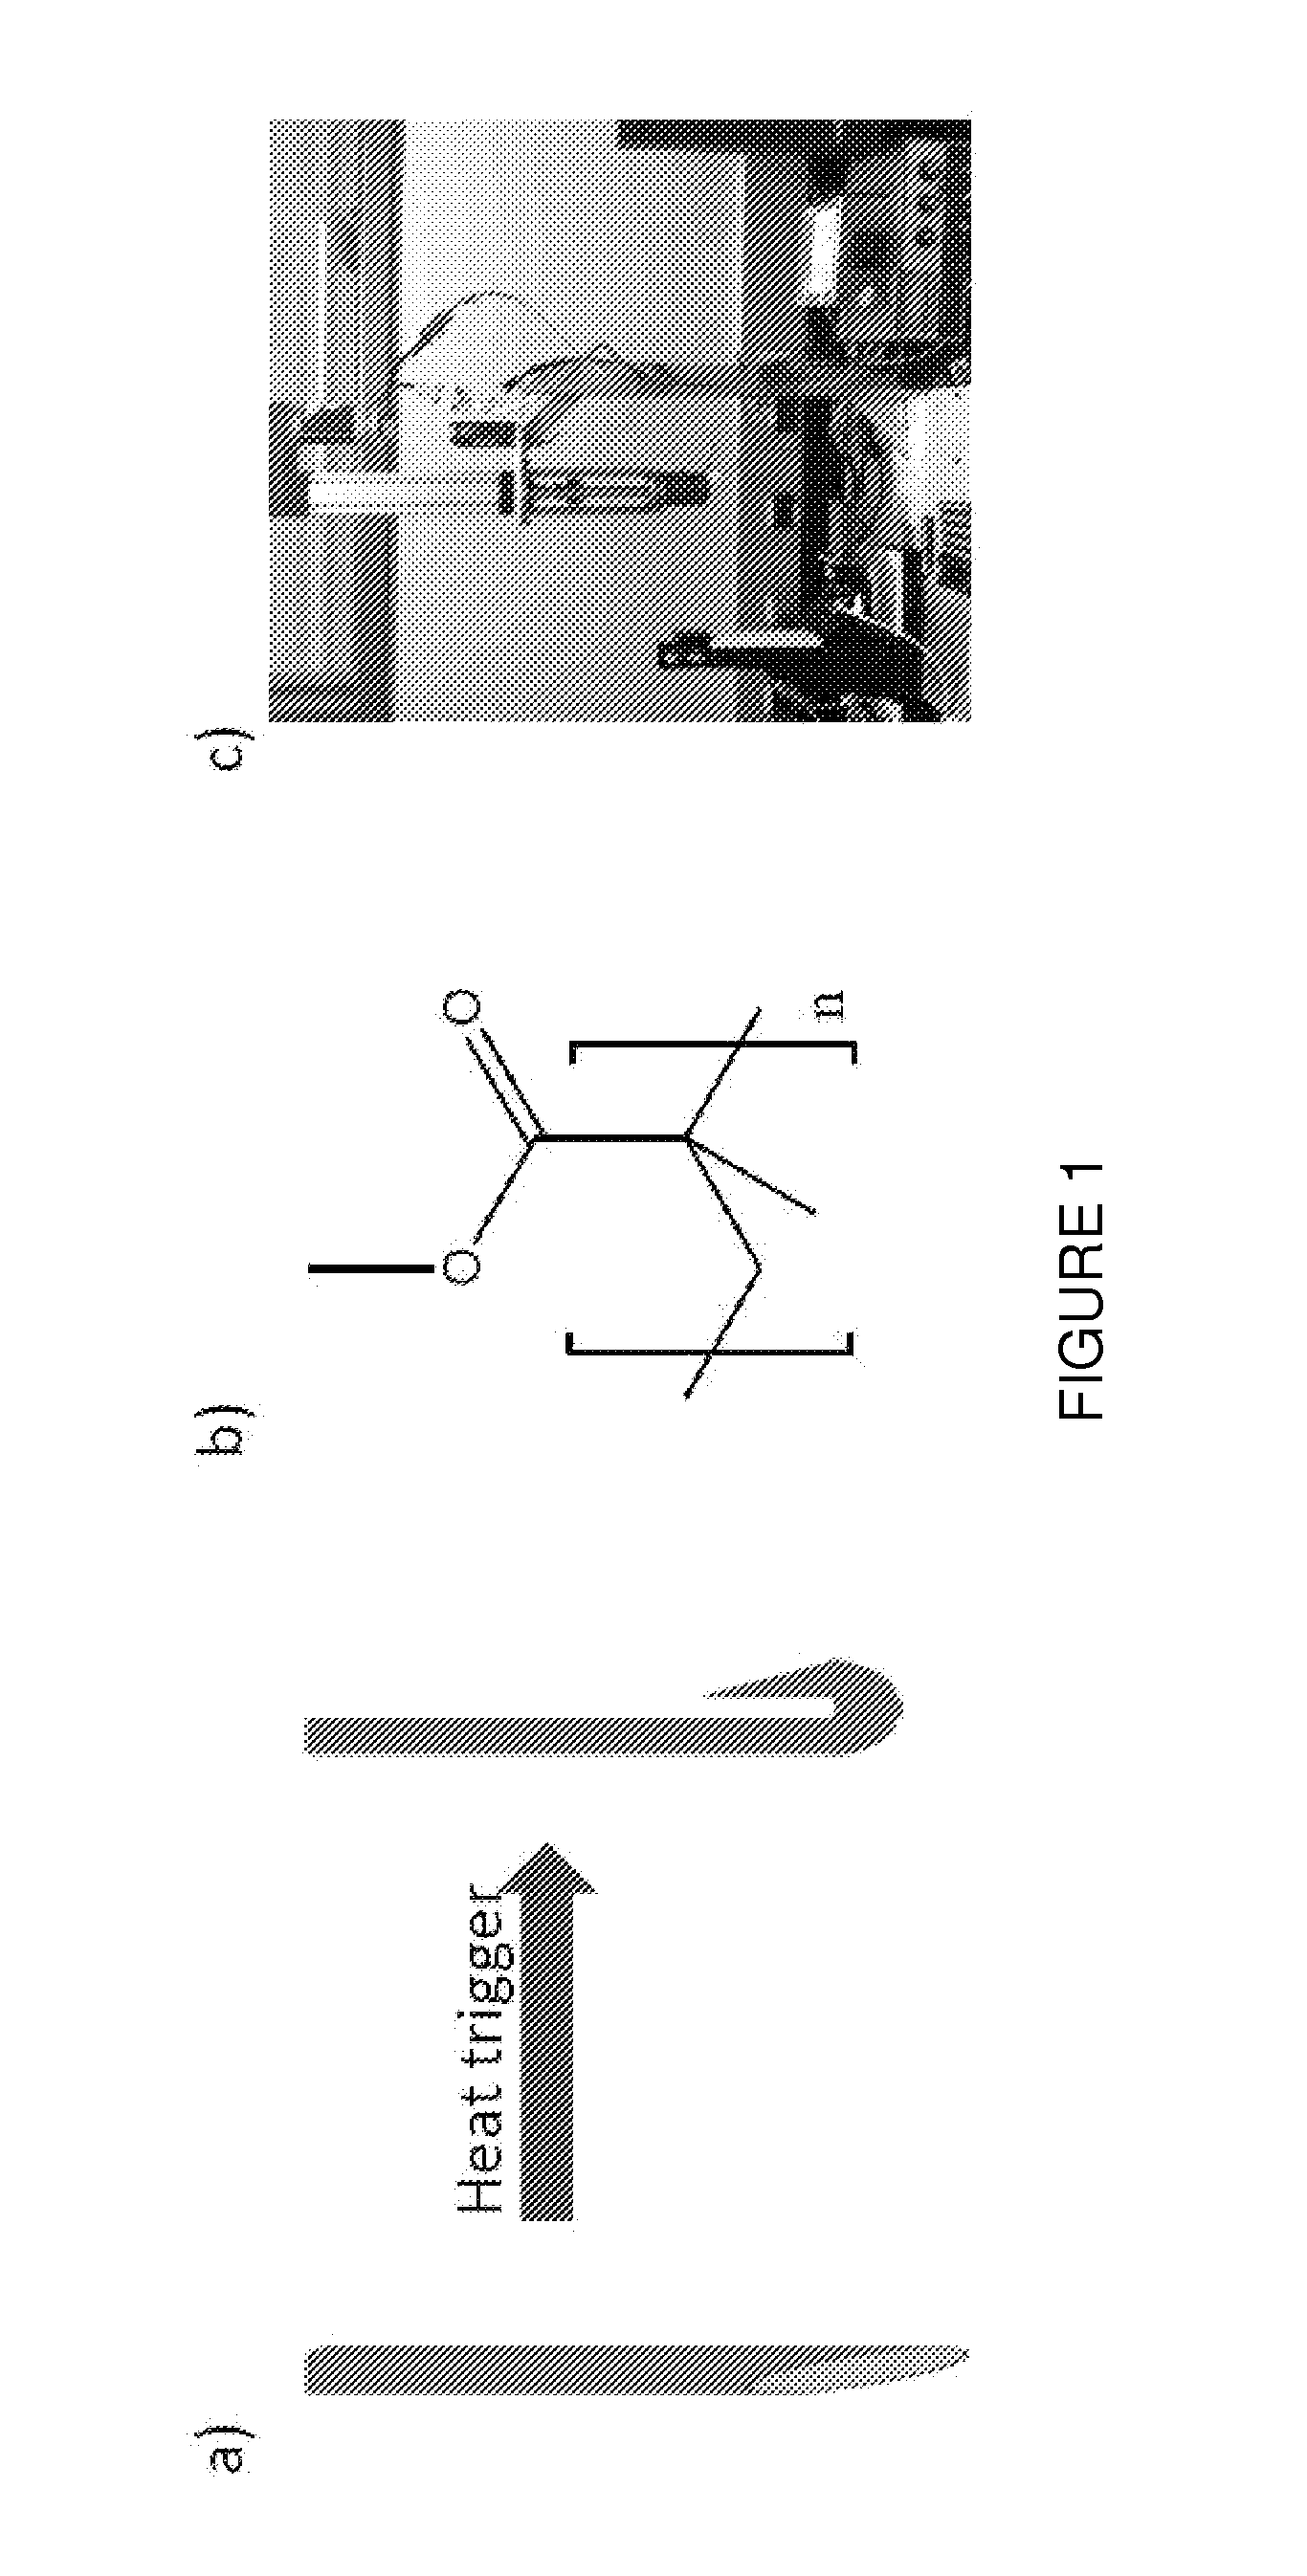 Heat-curling polymeric needle for safe disposal